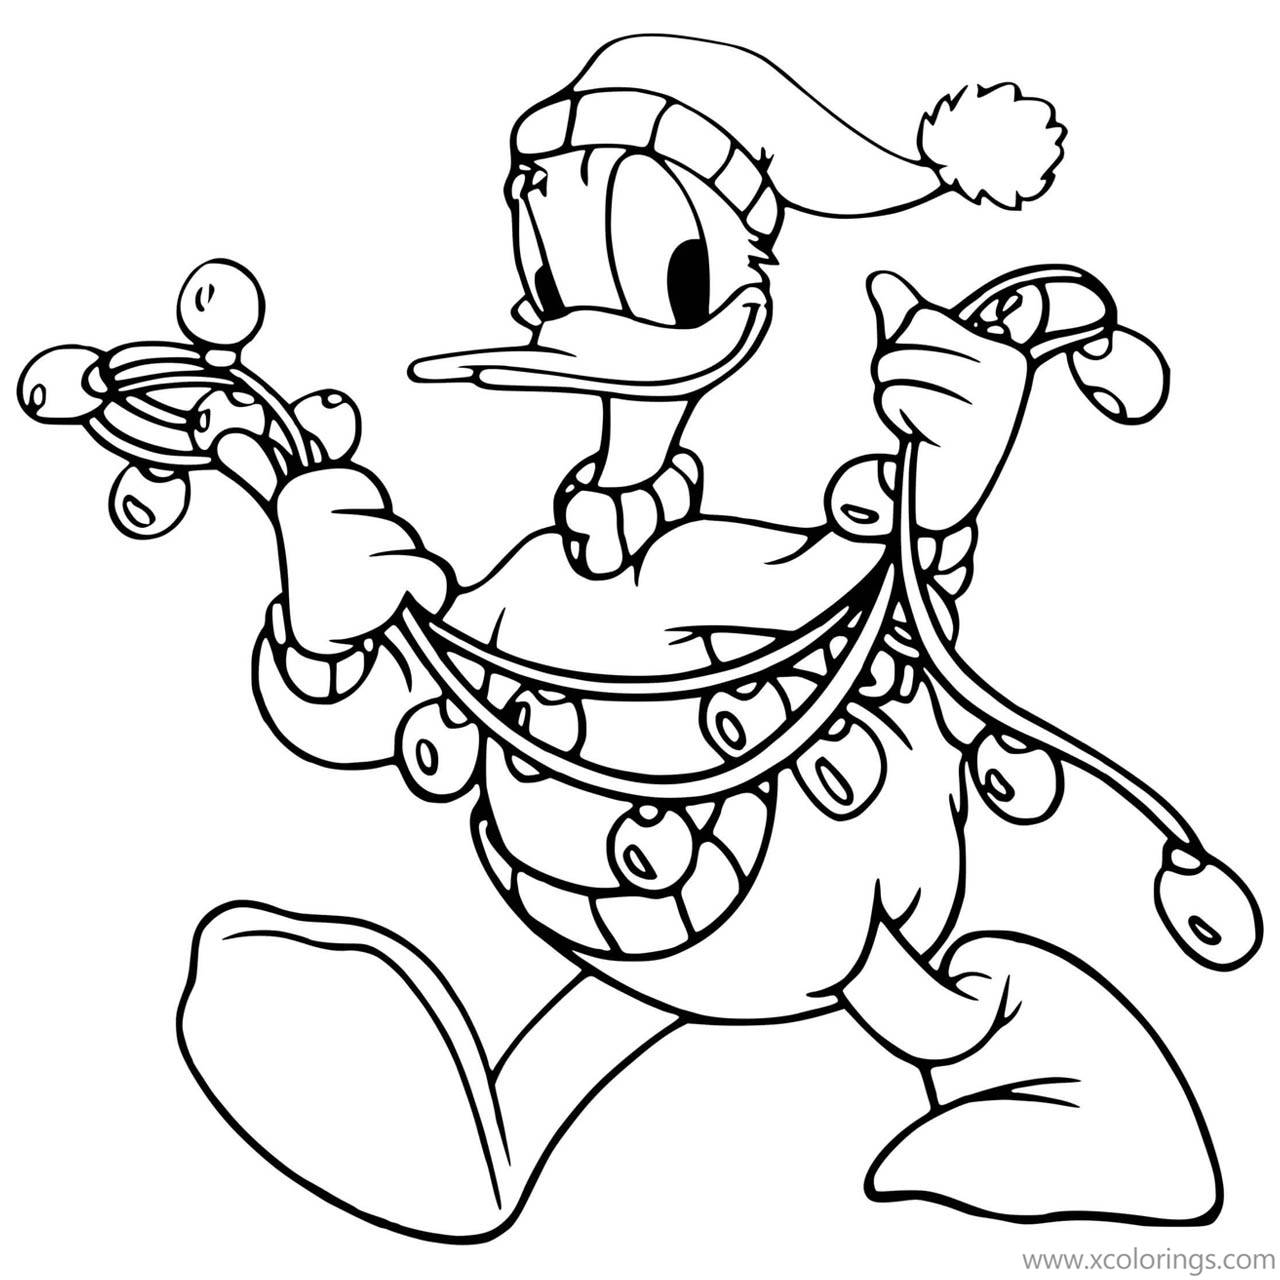 Free Mickey Mouse Christmas Coloring Pages Donald Ducks with Christmas Lights printable